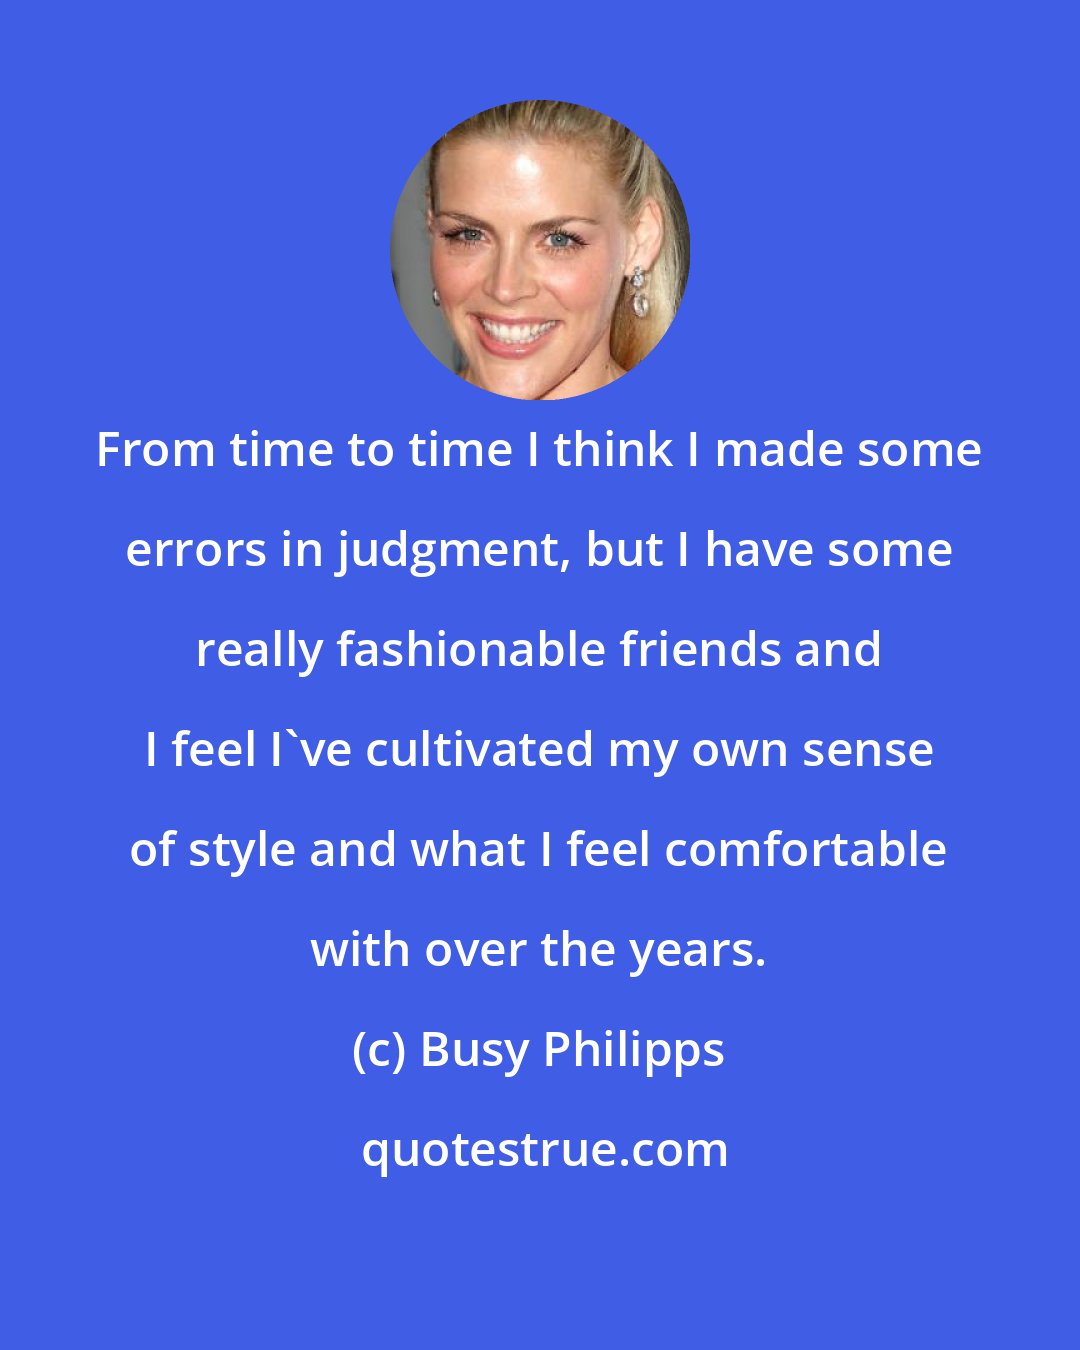 Busy Philipps: From time to time I think I made some errors in judgment, but I have some really fashionable friends and I feel I've cultivated my own sense of style and what I feel comfortable with over the years.